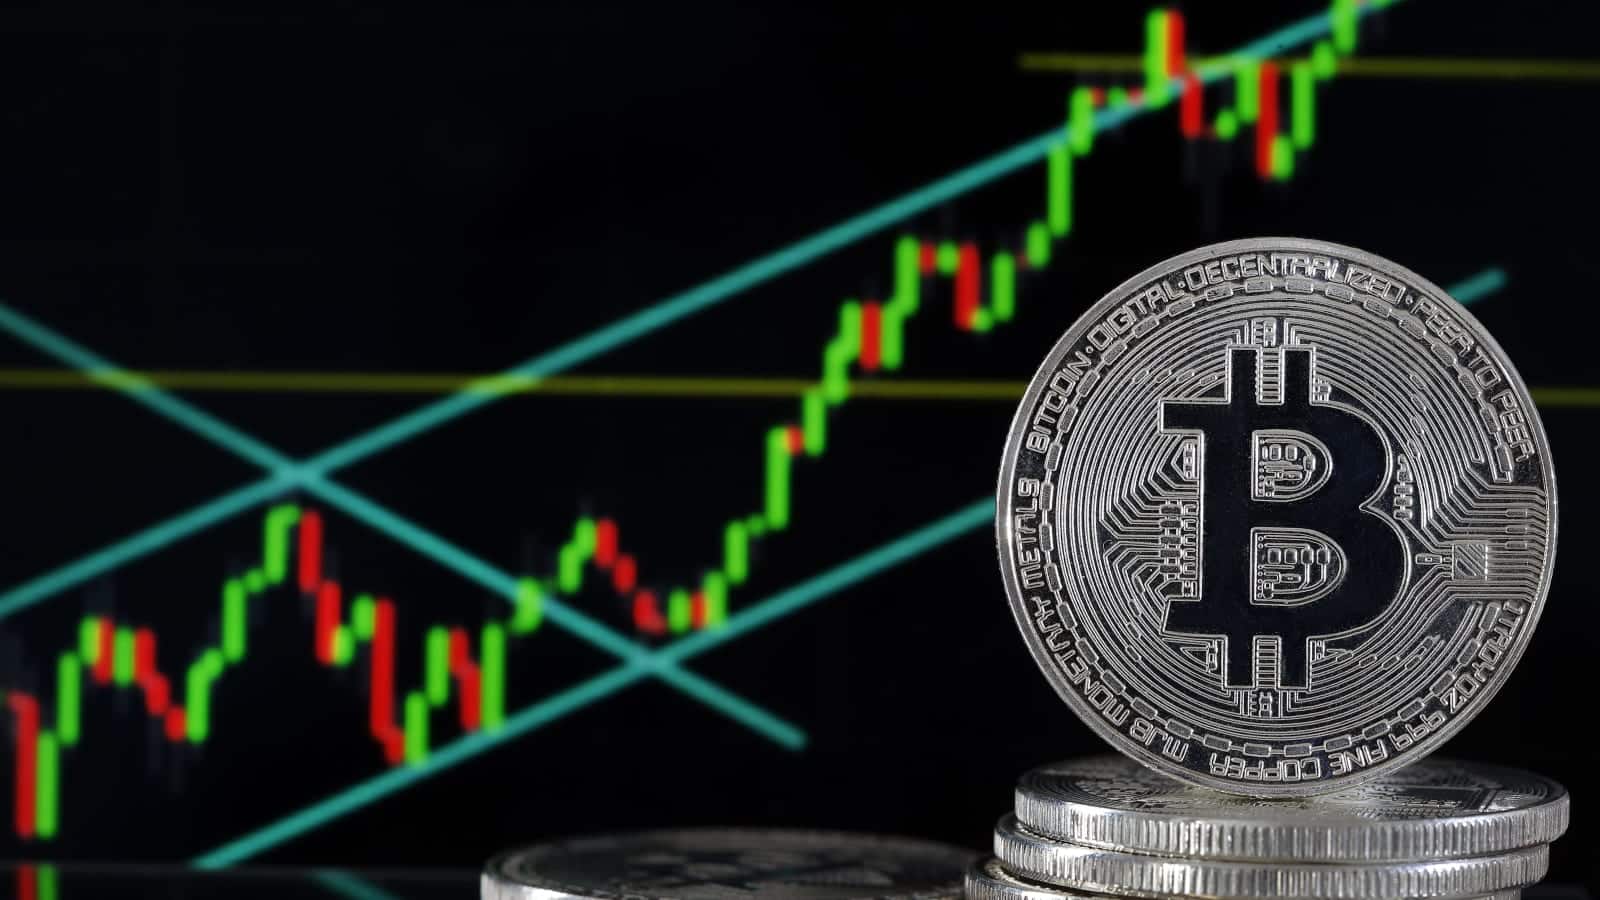 Bitcoin June 2024 Expiry Futures and Options in High Demand Due to Halving: Deribit